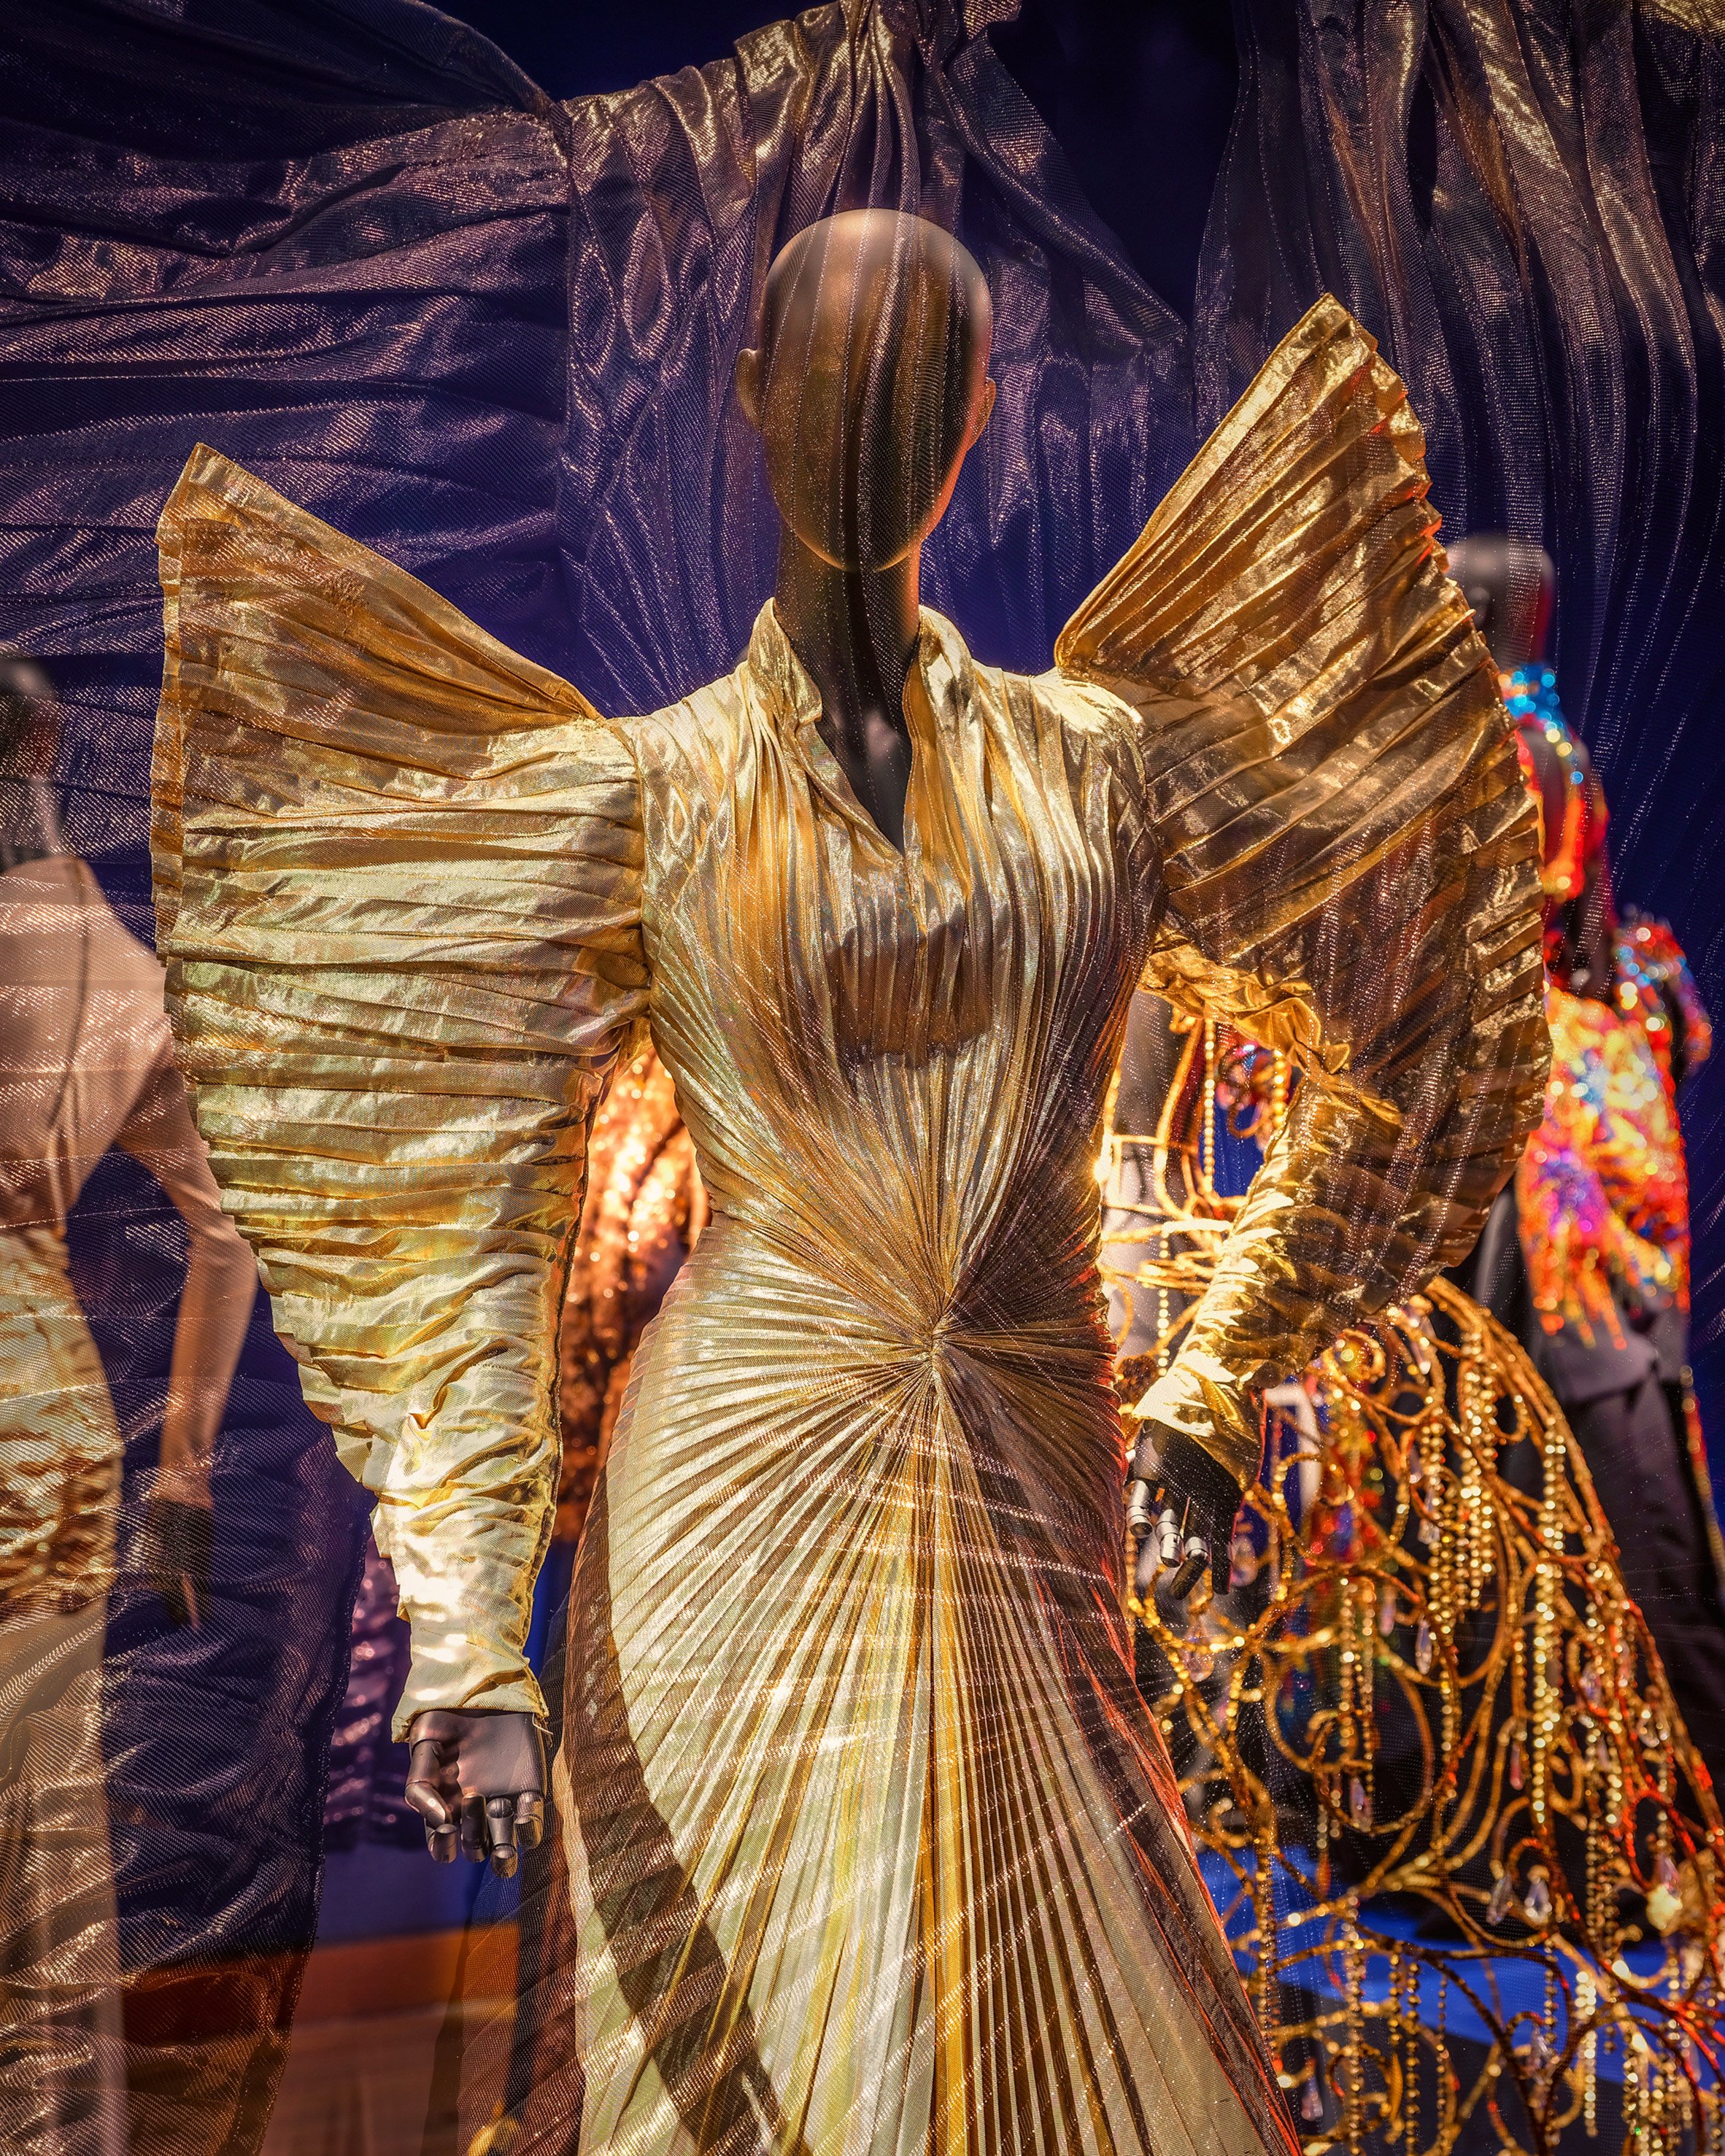 Thierry Mugler exhibition includes garments for dangerous